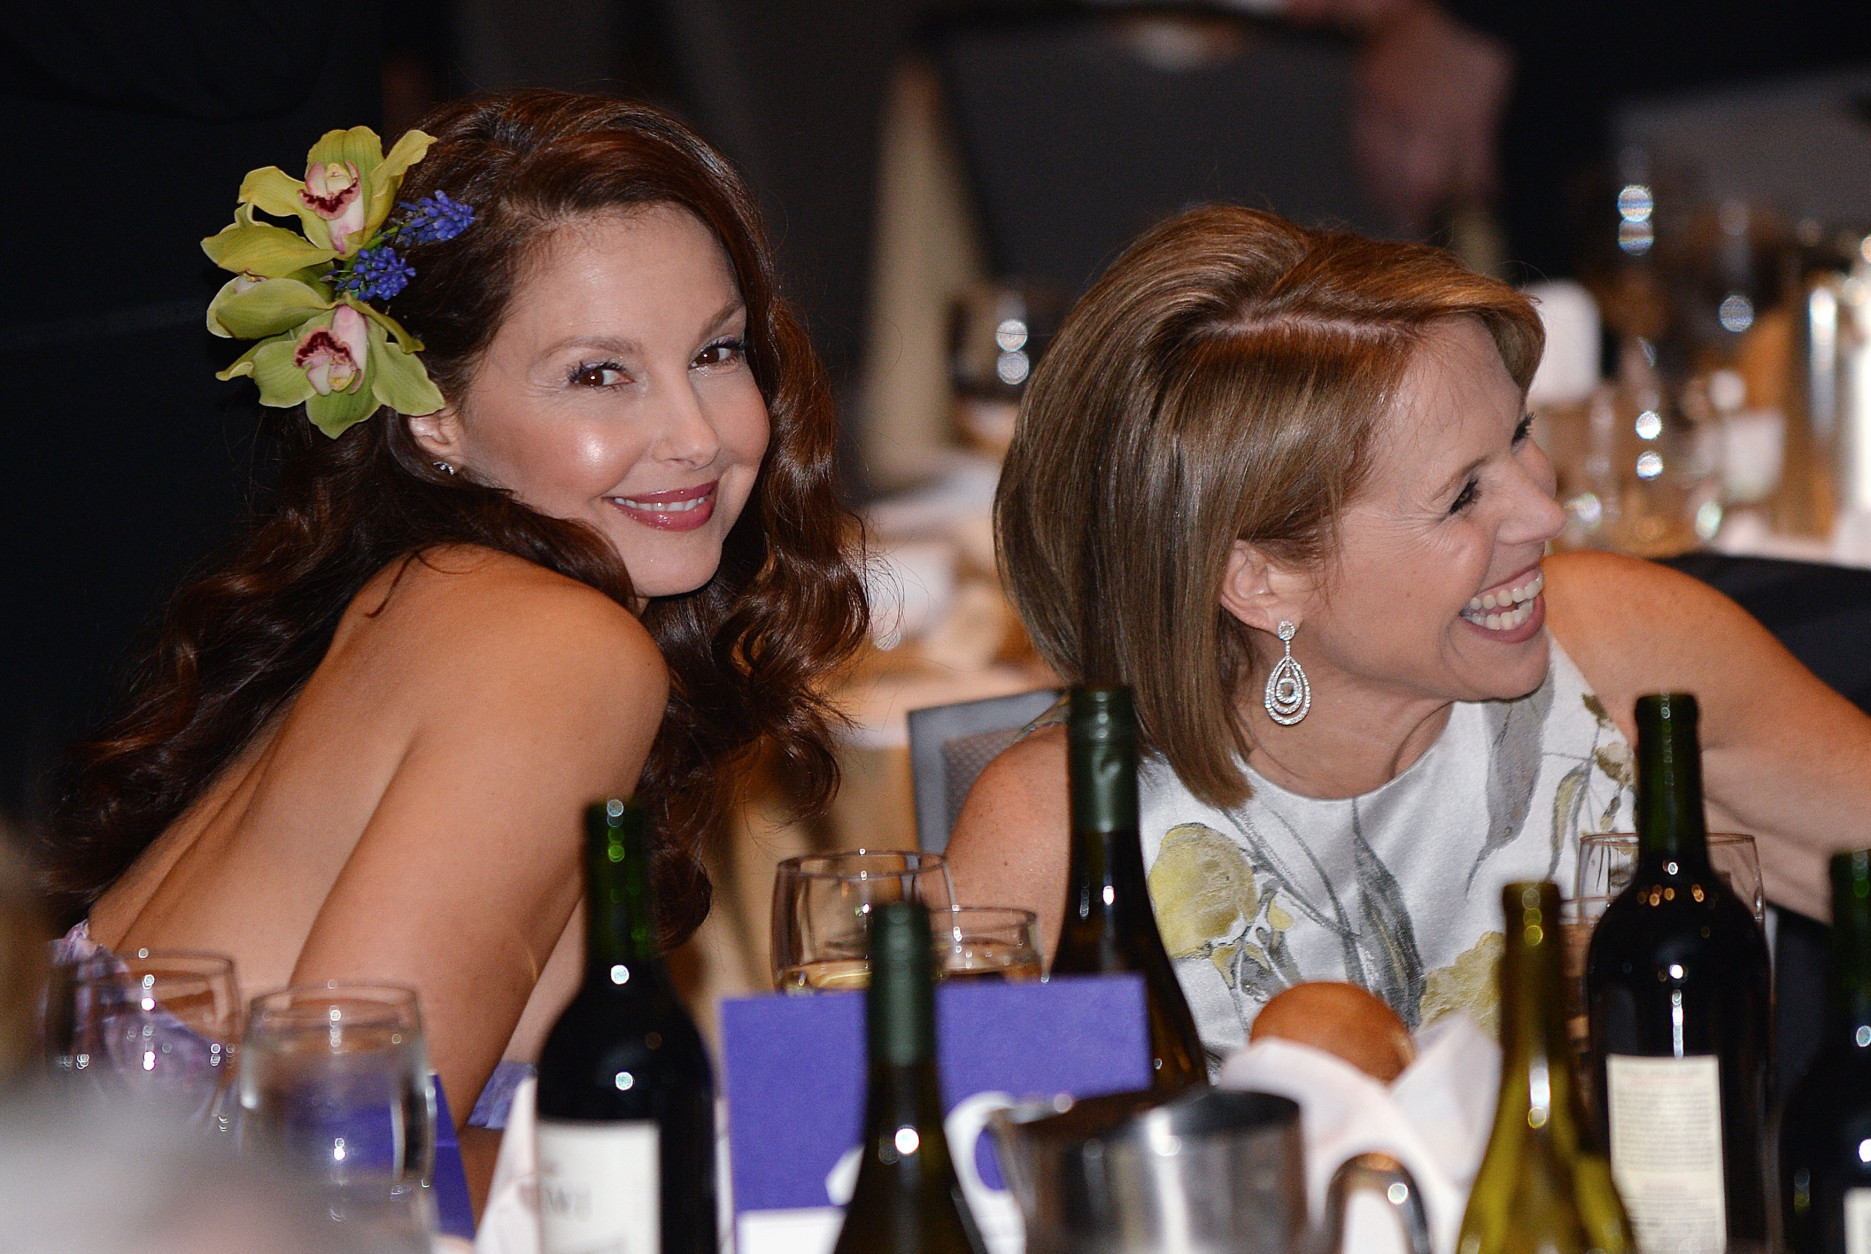 WASHINGTON, DC - APRIL 25:  American journalist and author Katie Couric and actress Ashley Judd attend the annual White House Correspondent's Association Gala at the Washington Hilton hotel April 25, 2015 in Washington, D.C. The dinner is an annual event attended by journalists, politicians and celebrities. (Photo by Olivier Douliery-Pool/Getty Images)